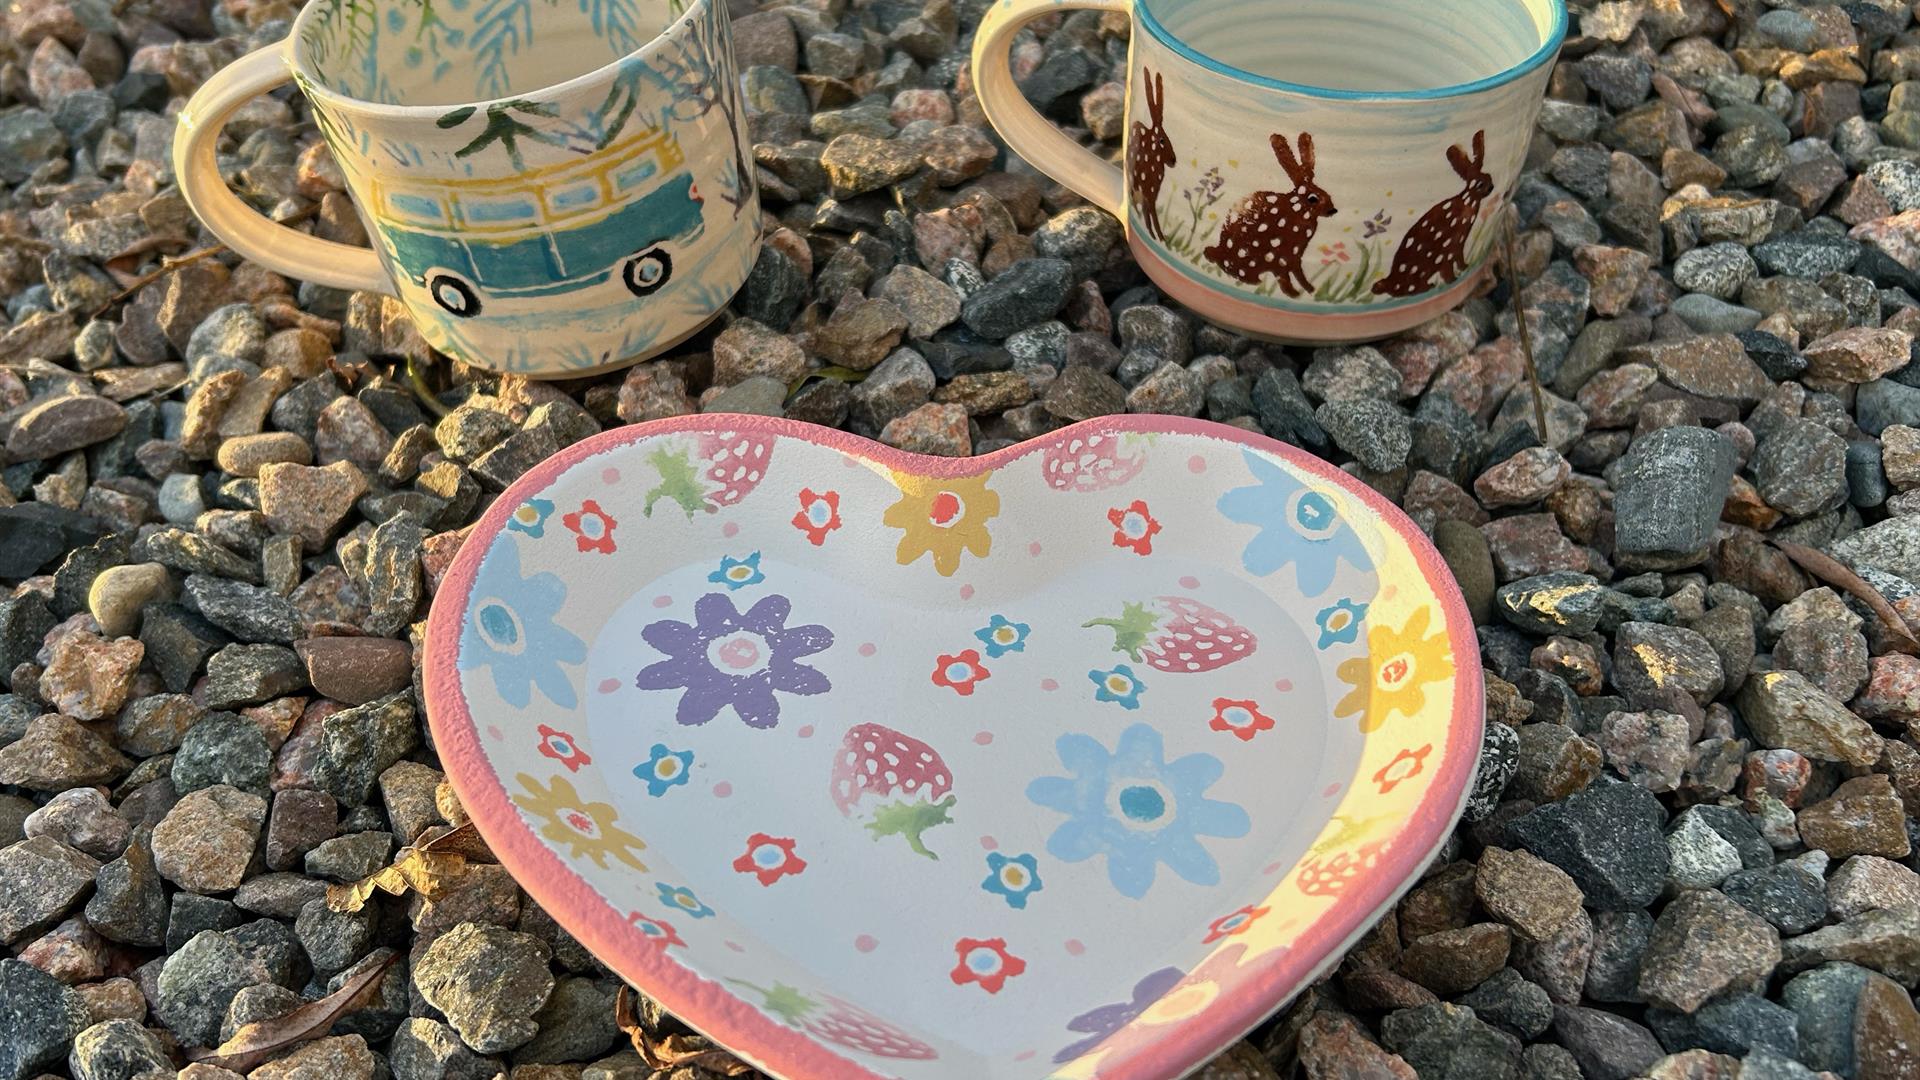 two cafe mugs decorated with a winter camper van, and little brown rabbits. A heart shaped dish sits in front of these, decorated with flowers and str